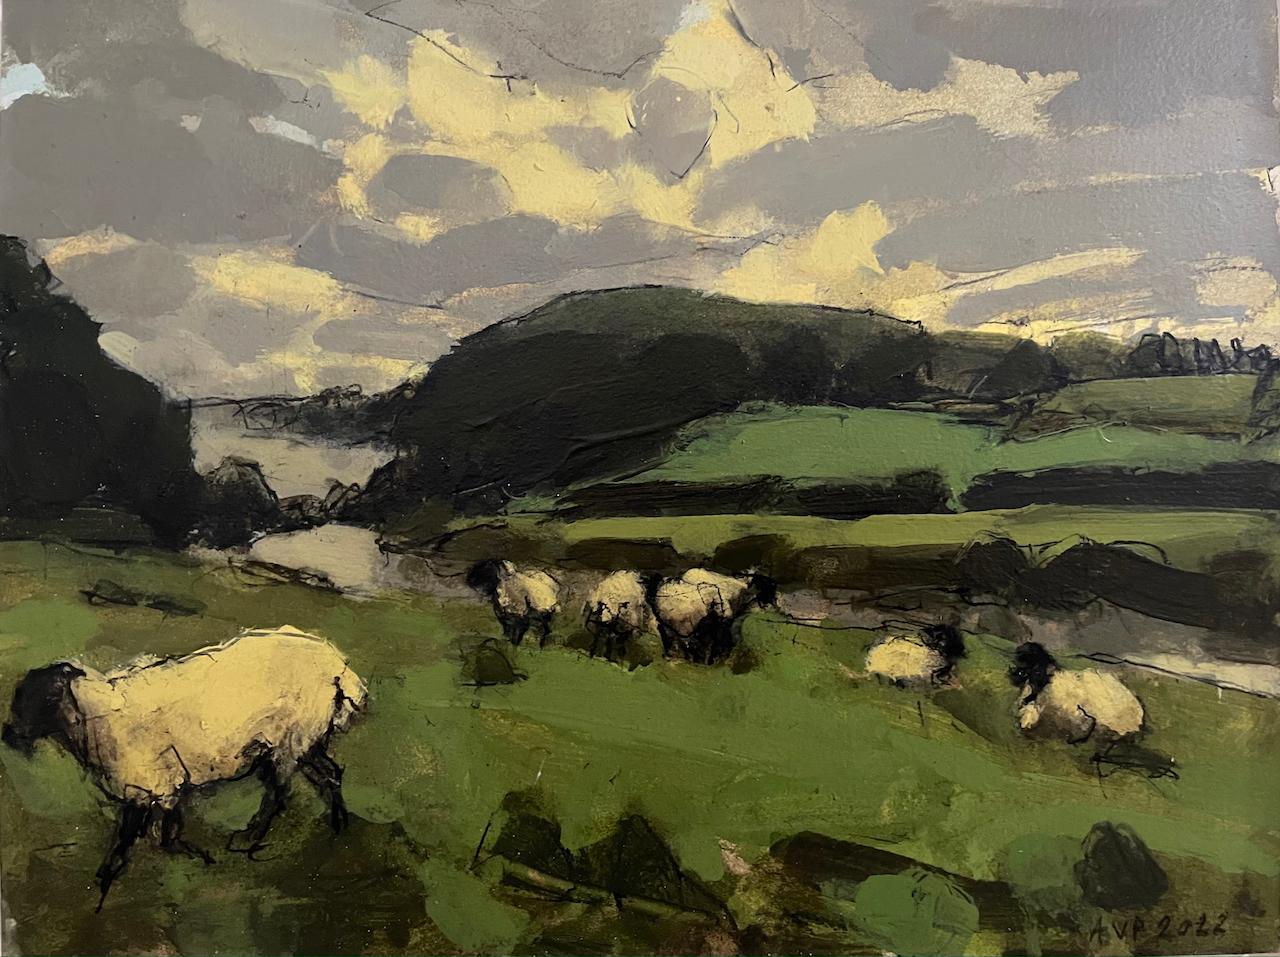 Anna Pinkster Landscape Painting - Early Morning by the River Wye, Gloucestershire, October, Cotswolds Landscape